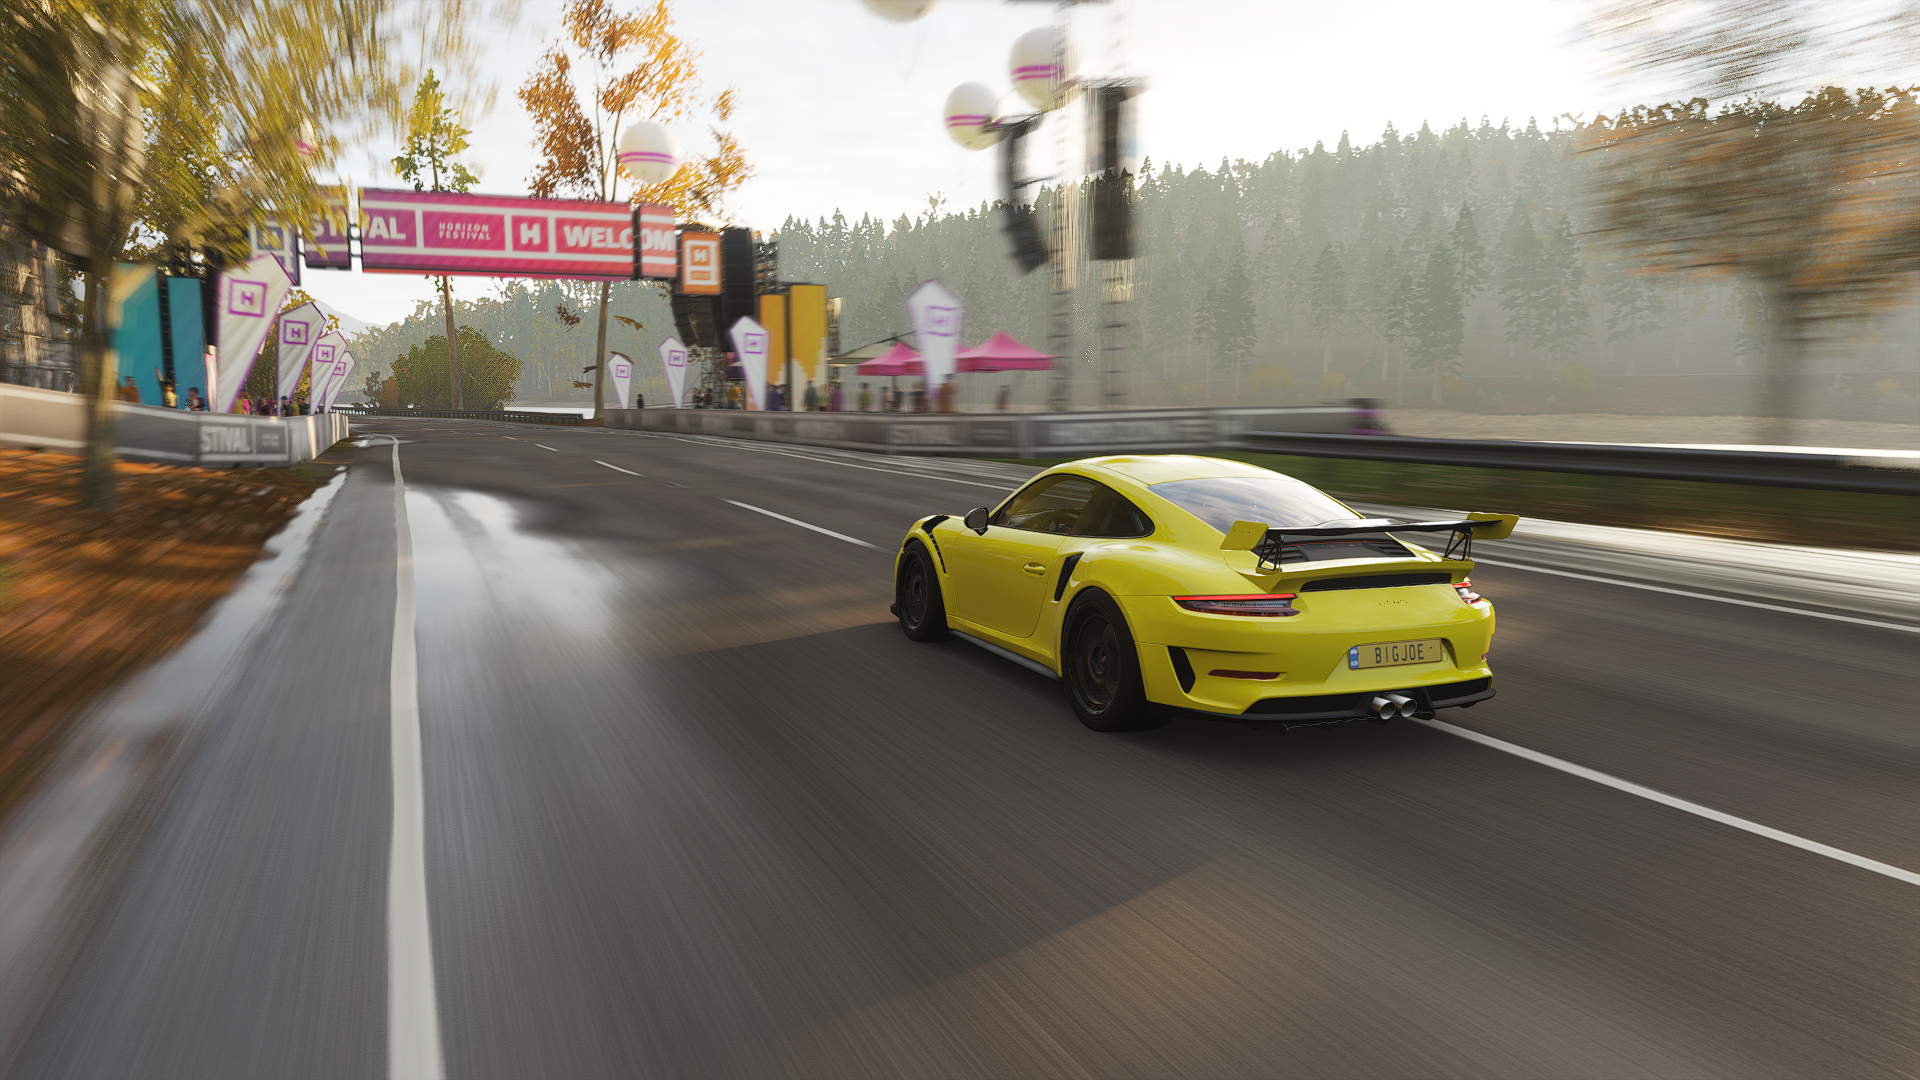 General 1920x1080 Forza Forza Horizon Forza Horizon 4 racing car video games road rear view taillights licence plates blurred blurry background trees CGI